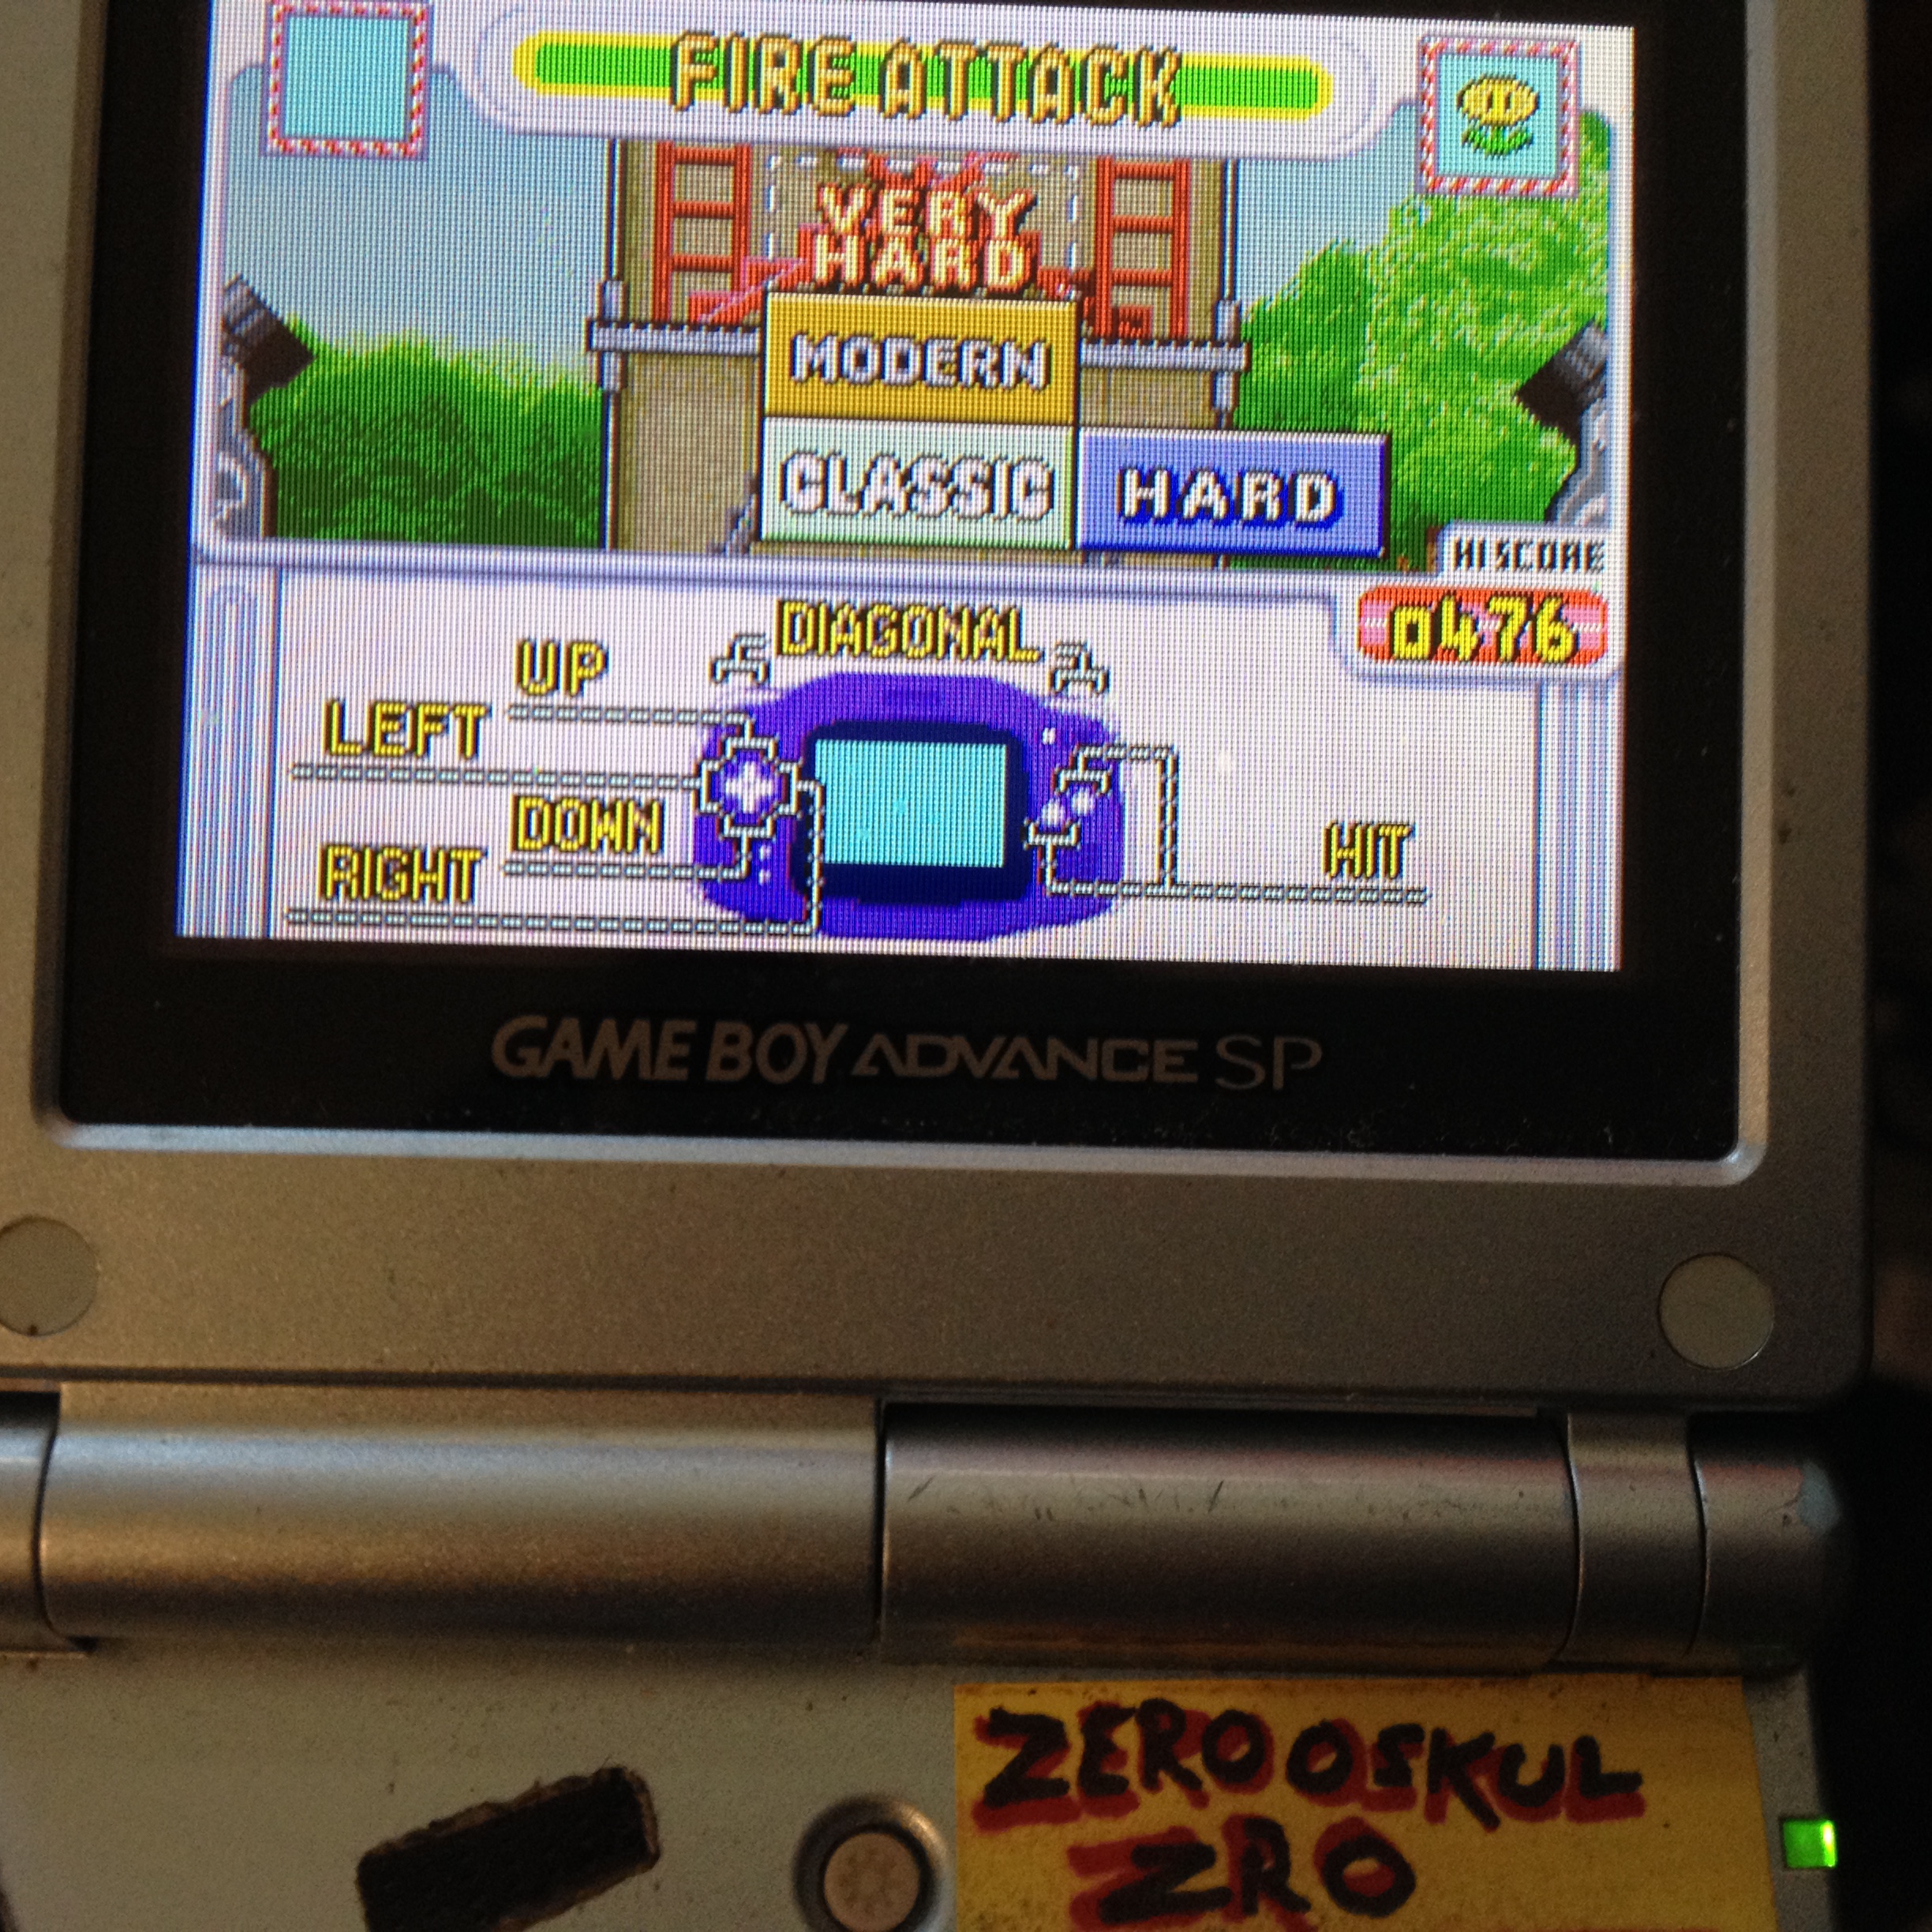 zerooskul: Game & Watch Gallery 4: Fire Attack [Classic: Hard] (GBA) 476 points on 2019-08-11 14:42:40